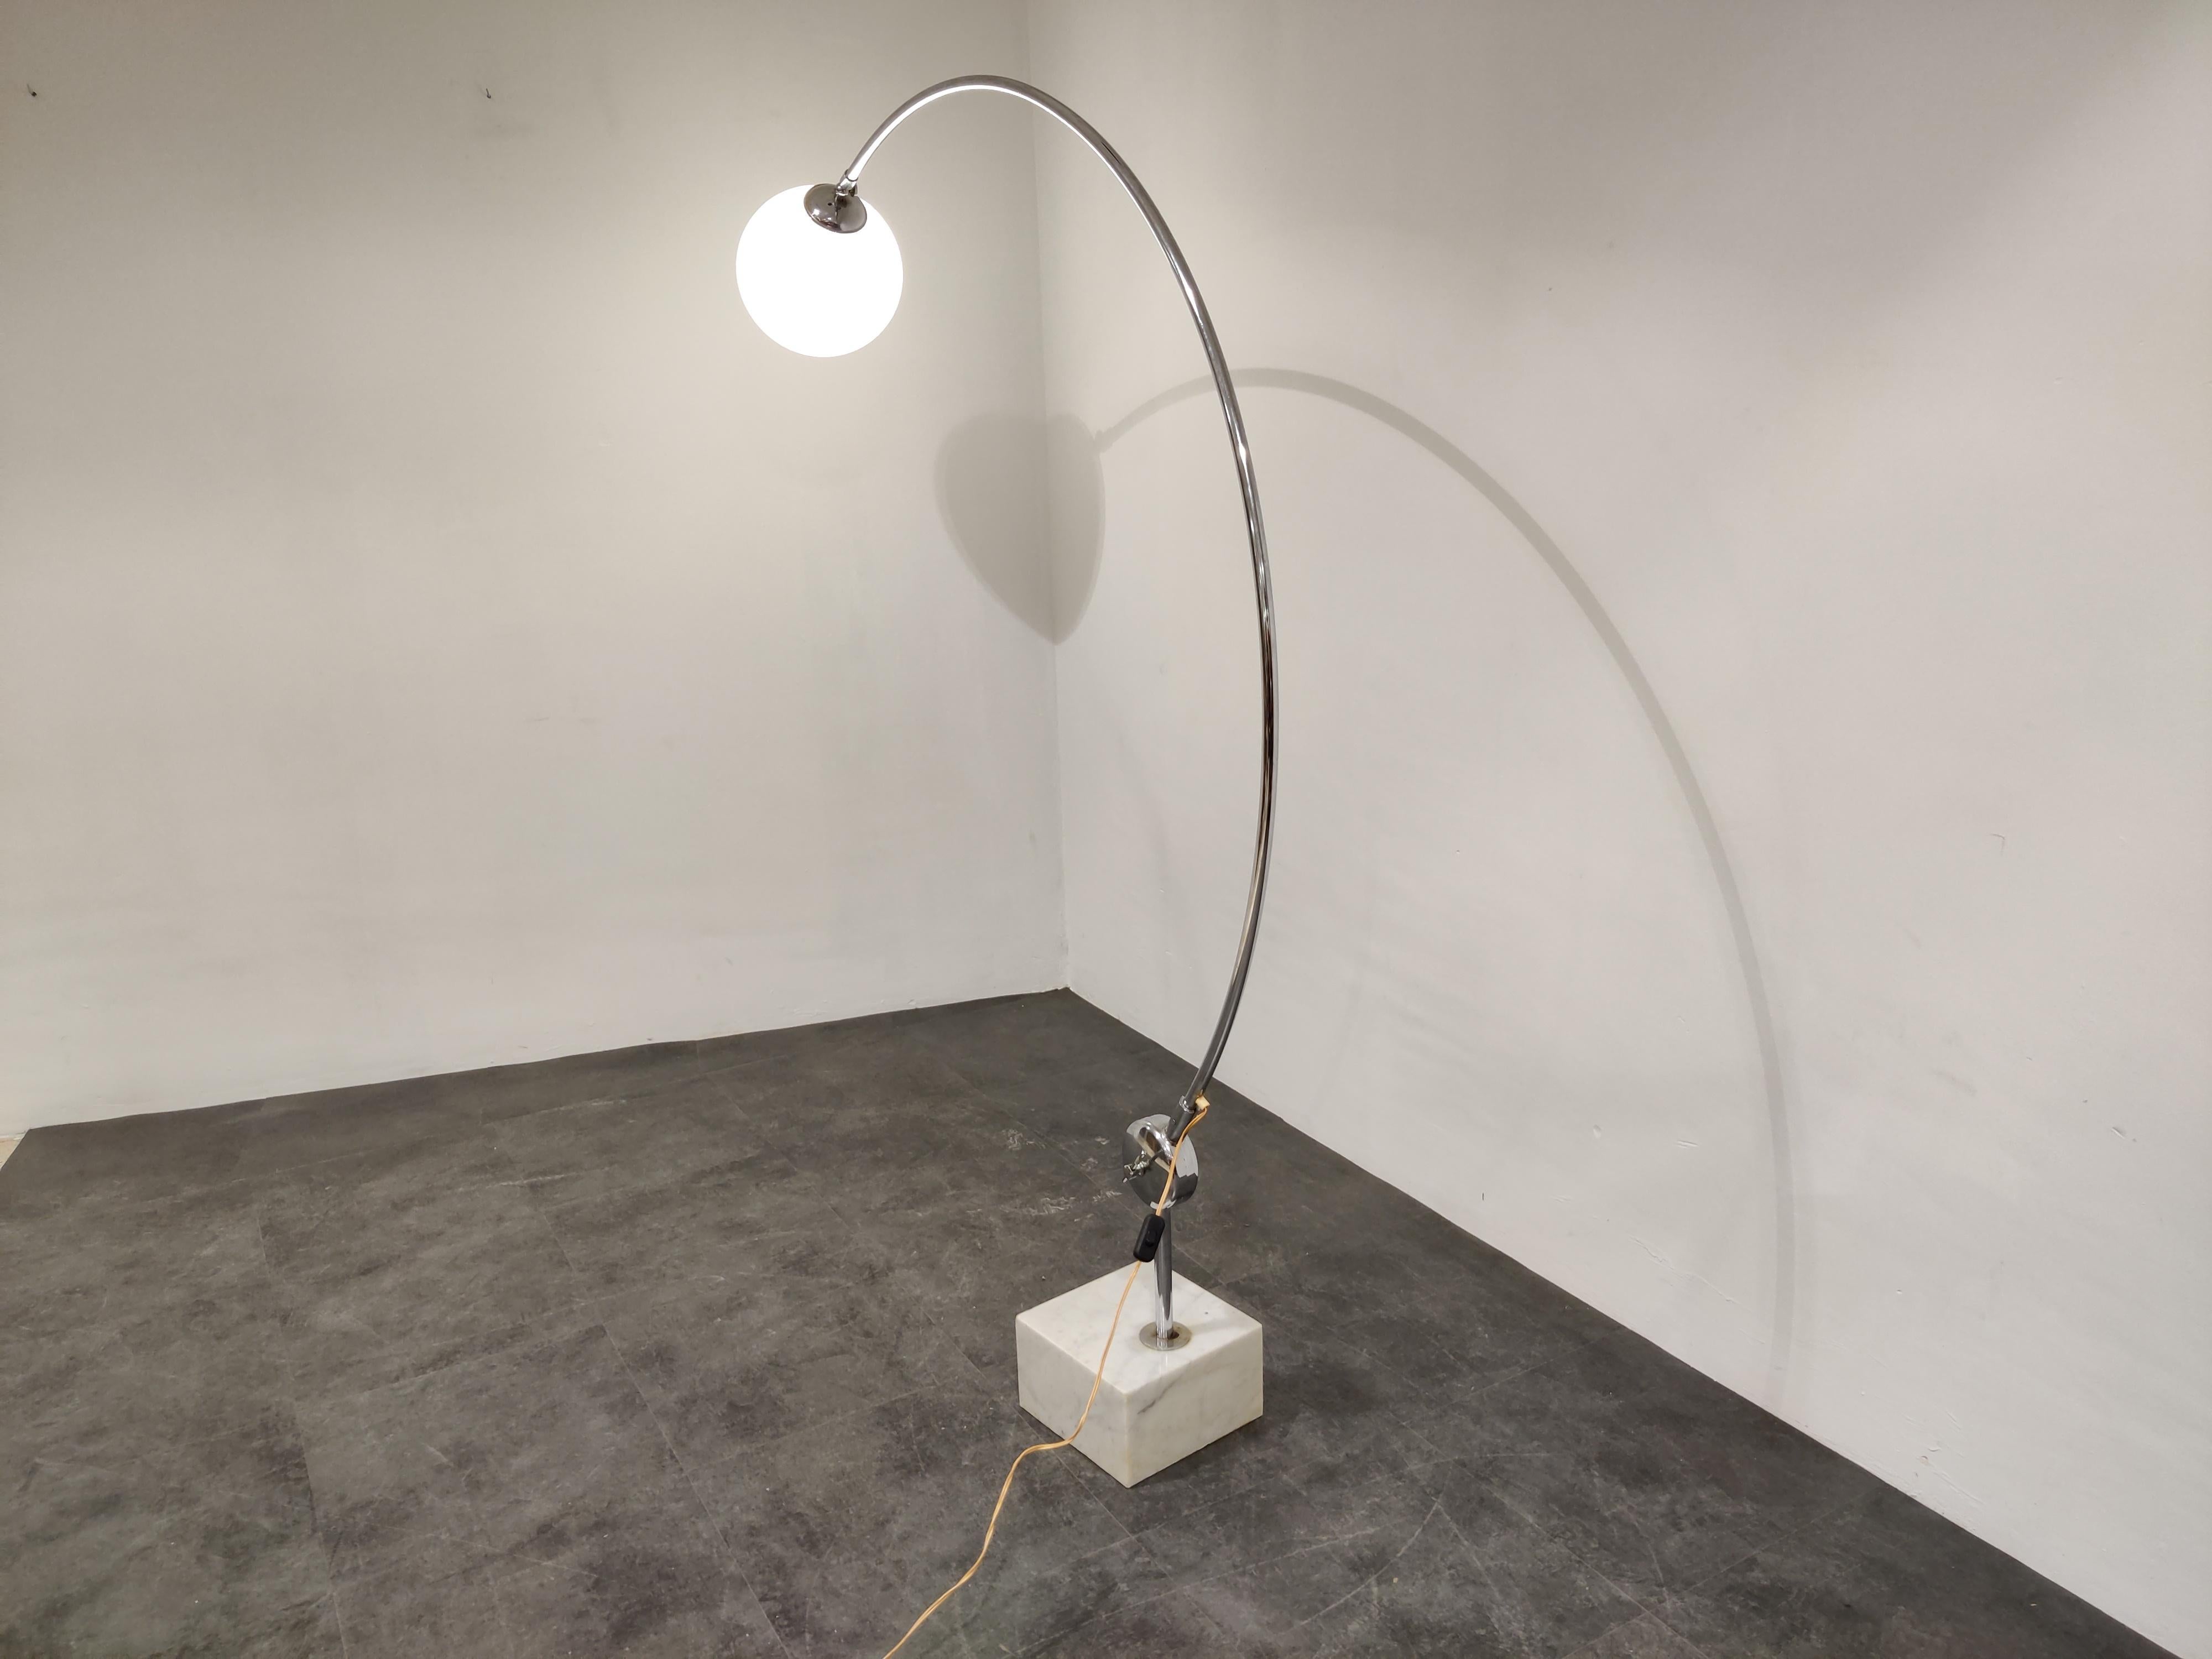 Midcentury chromed 'arched' floor lamp with a white marble base and an opaline globe.

The lamp emits a warm welcoming light because of the glass globe.

Tested and ready to use, works with a regular E27(E26) light bulb.

The floor lamp is